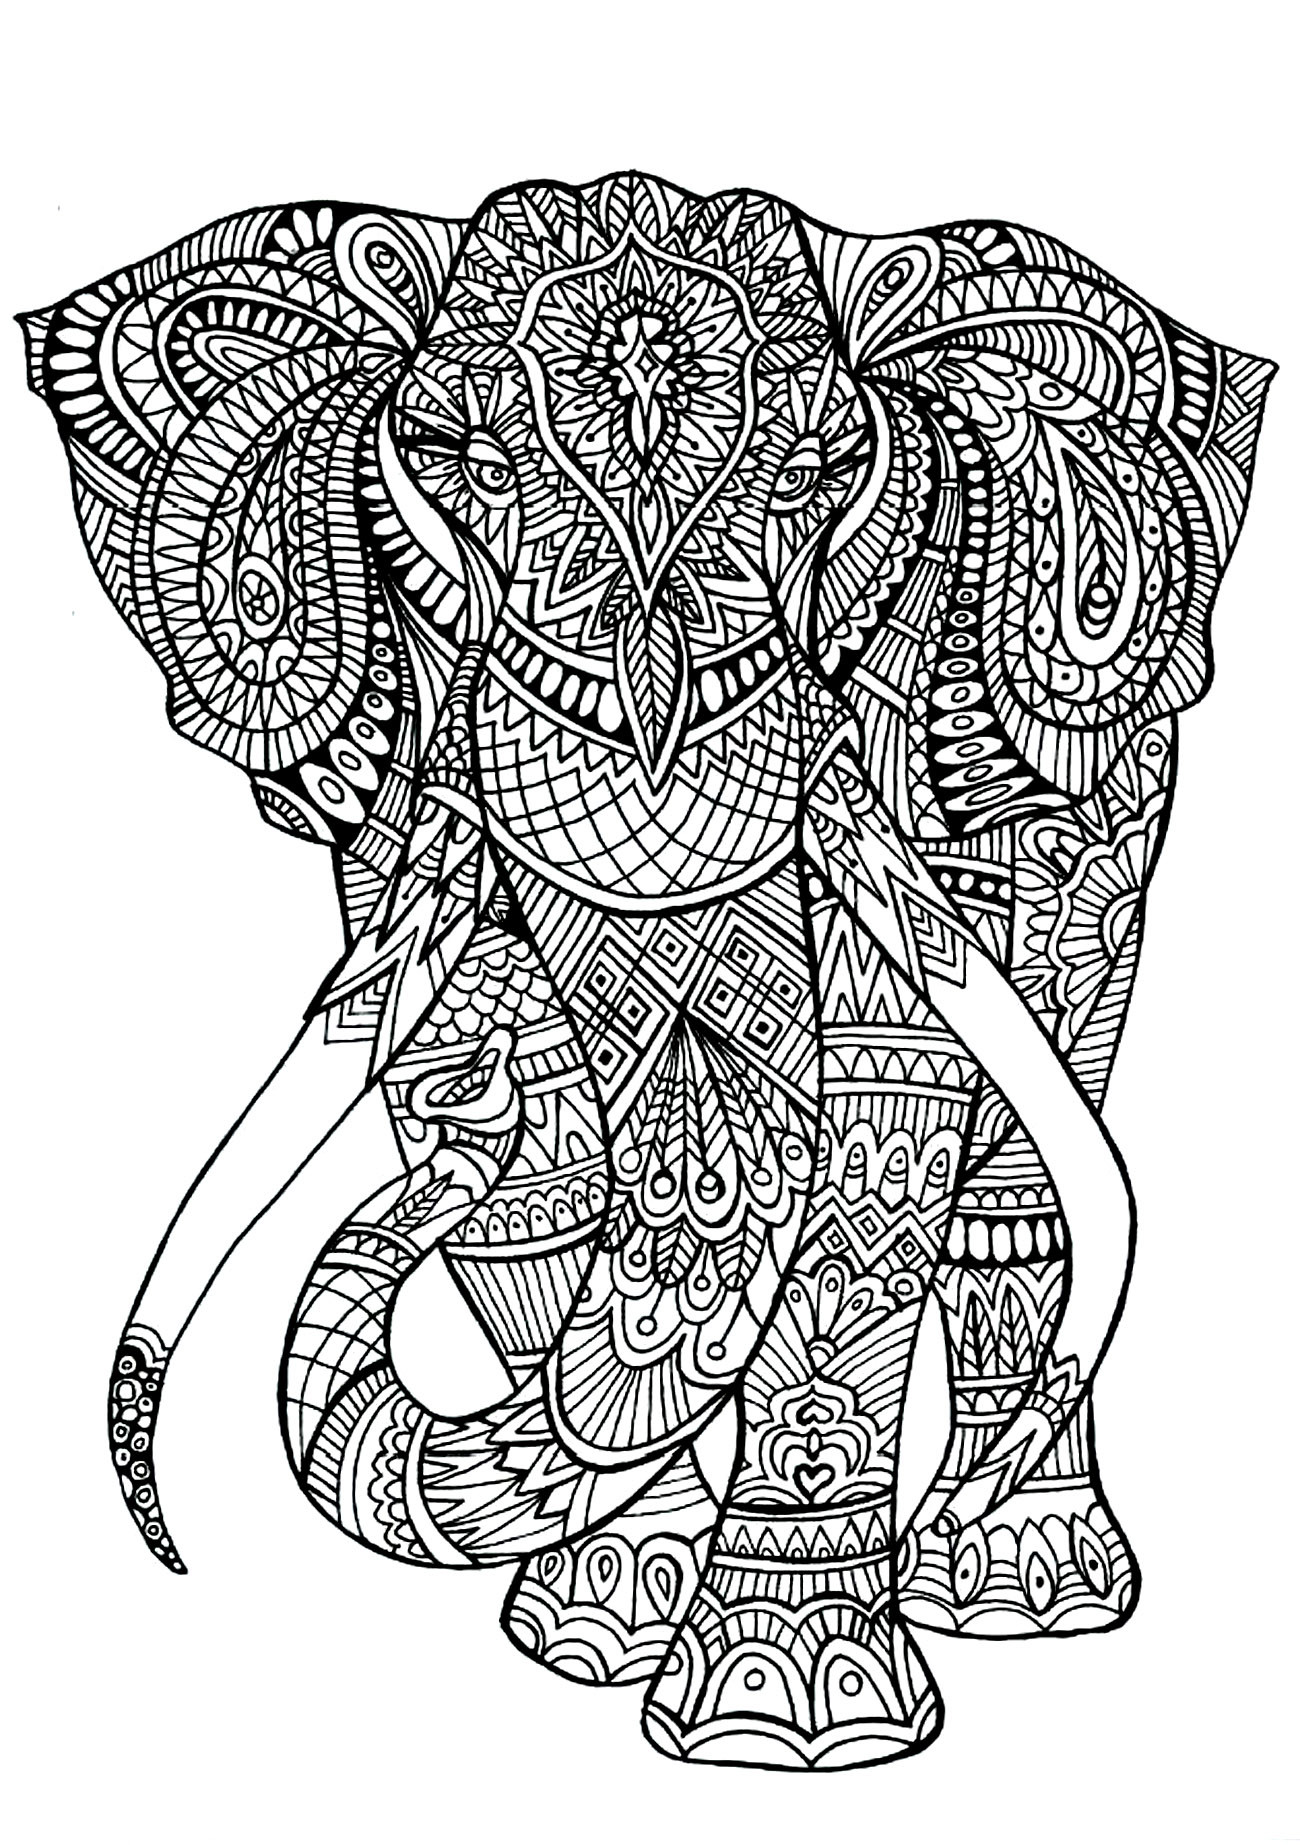 Printable Animal Coloring Pages For Adults
 Elephant patterns